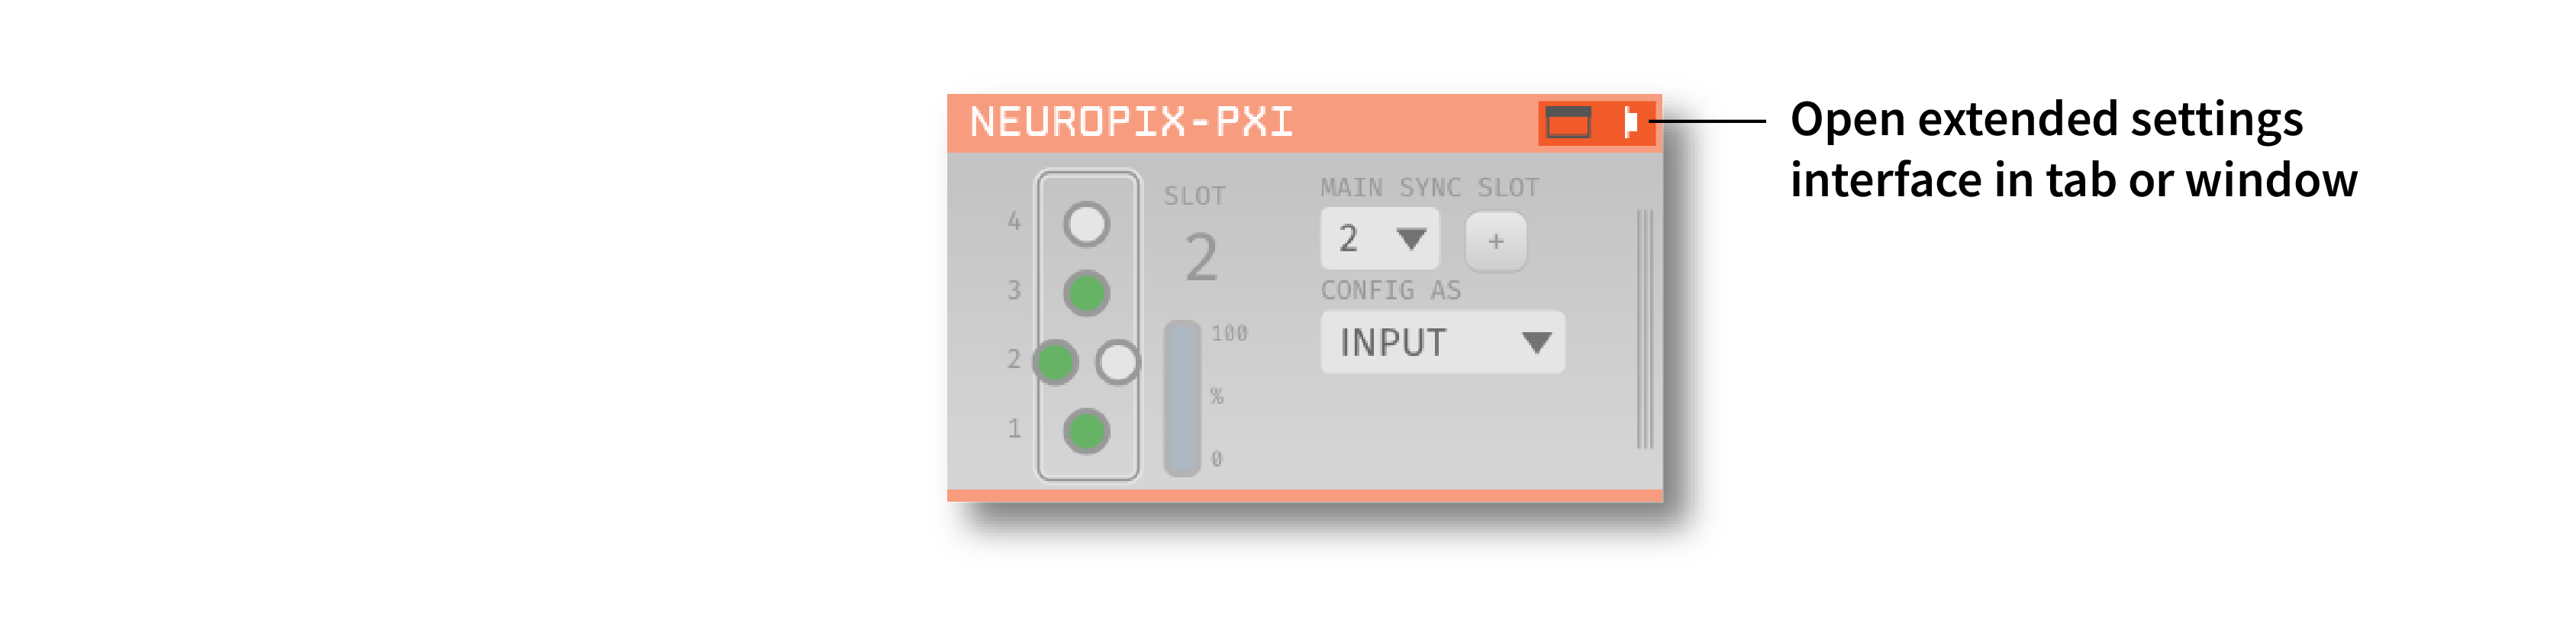 How to open the Neuropixels settings interface